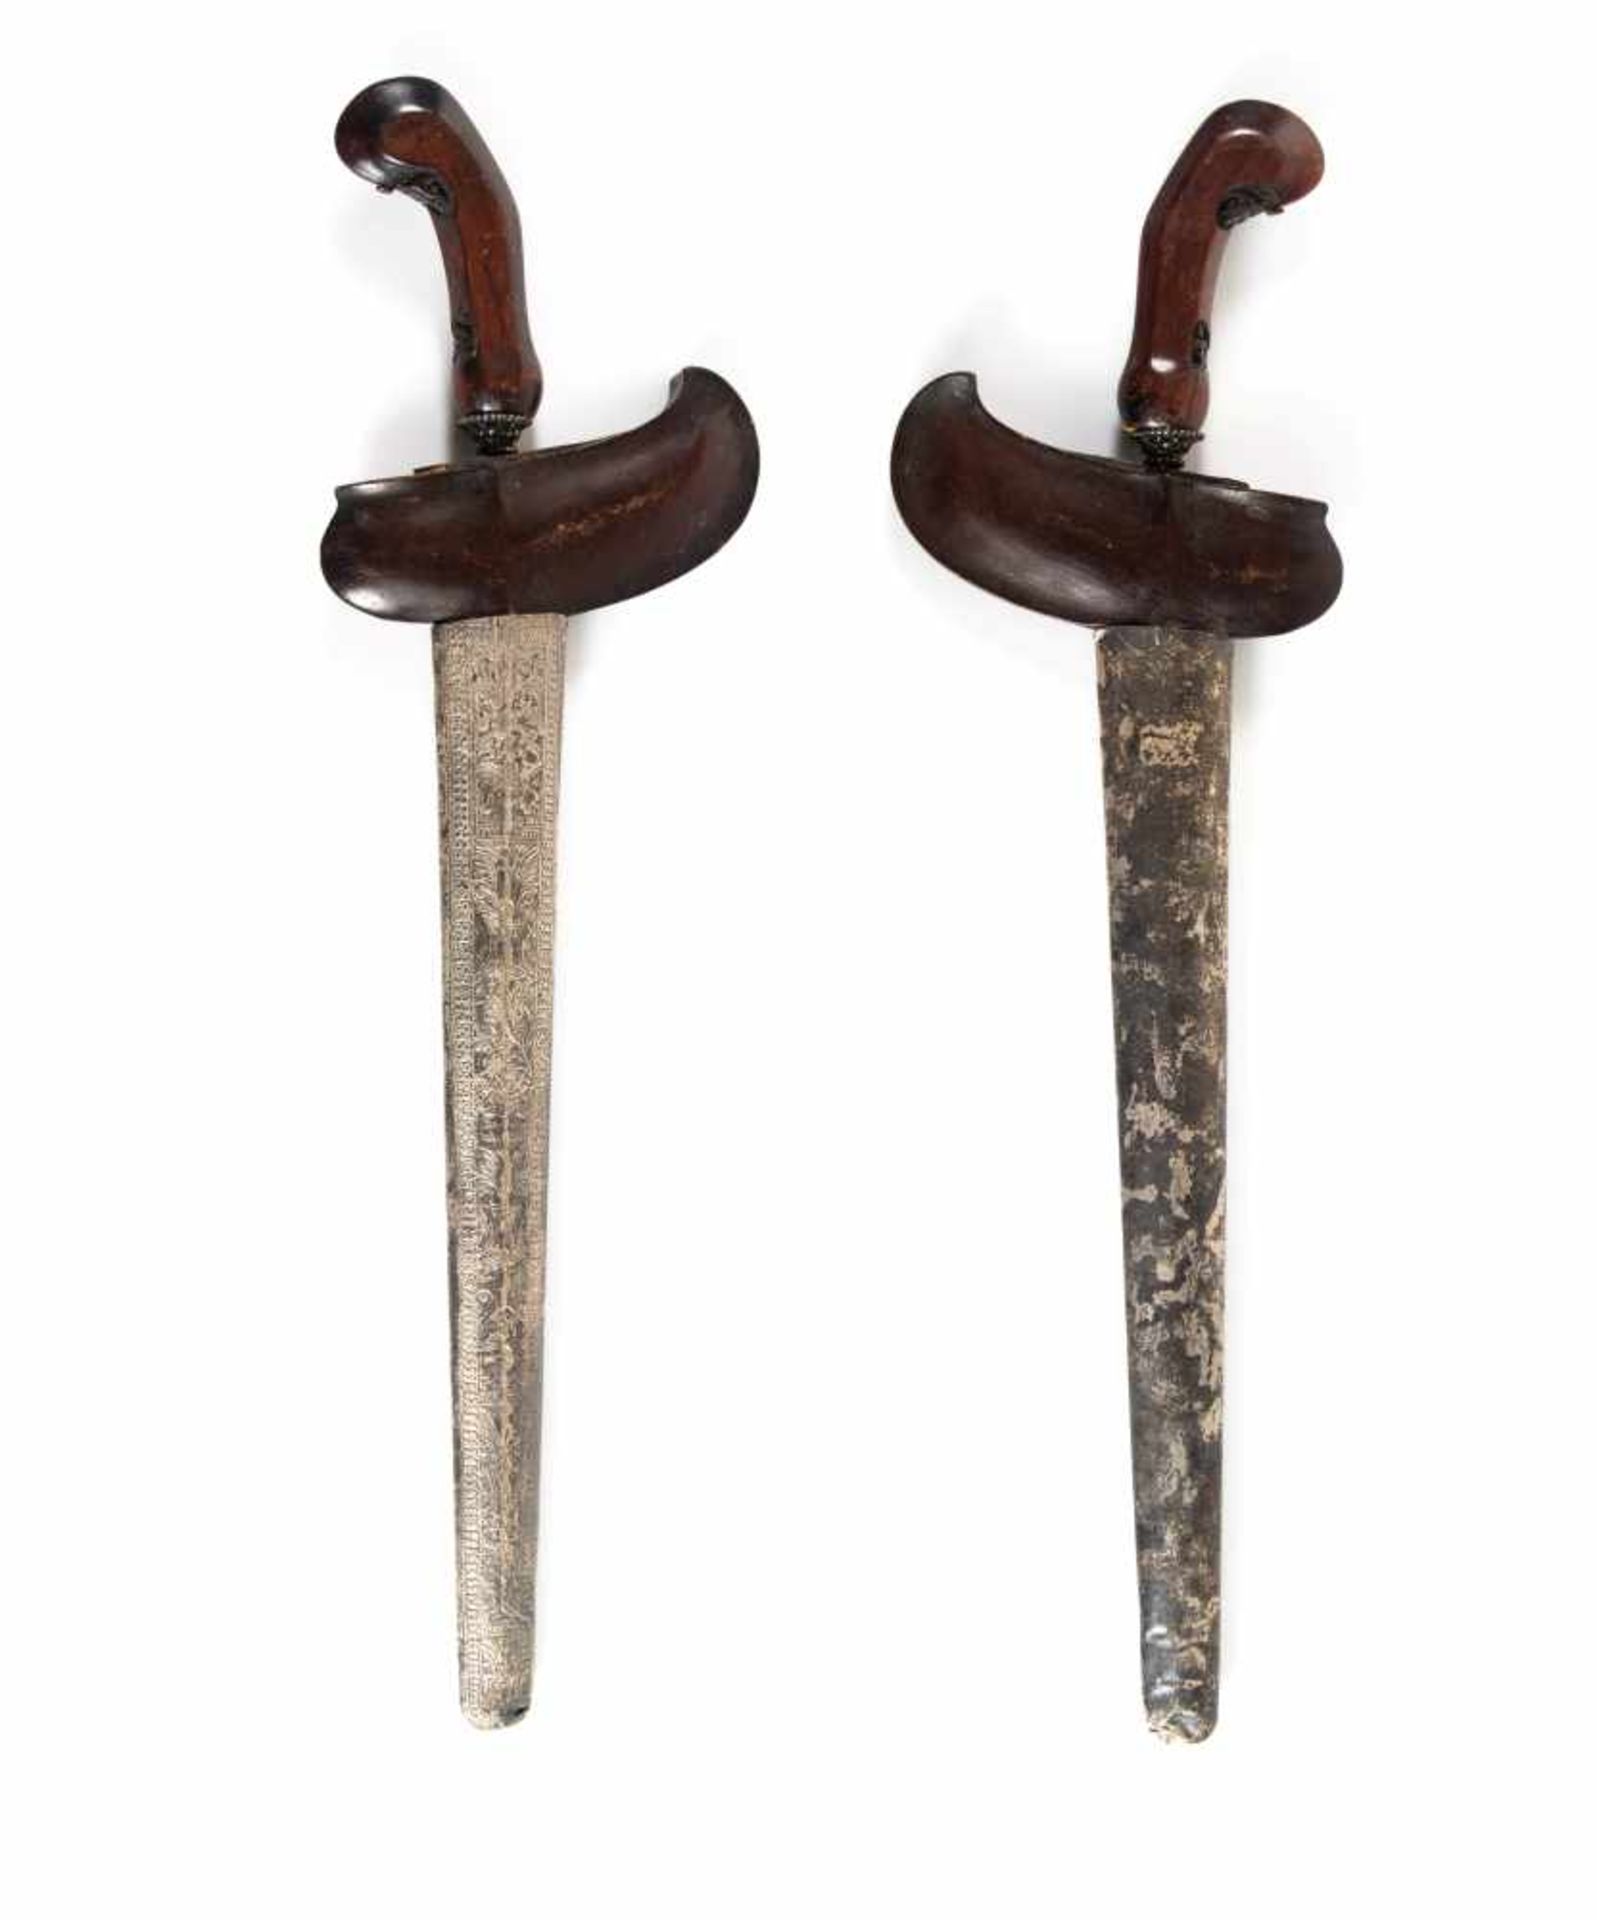 A Javanese Keris, with early 17th century blade.A Javanese Keris, with early 17th century blade. - Image 2 of 7